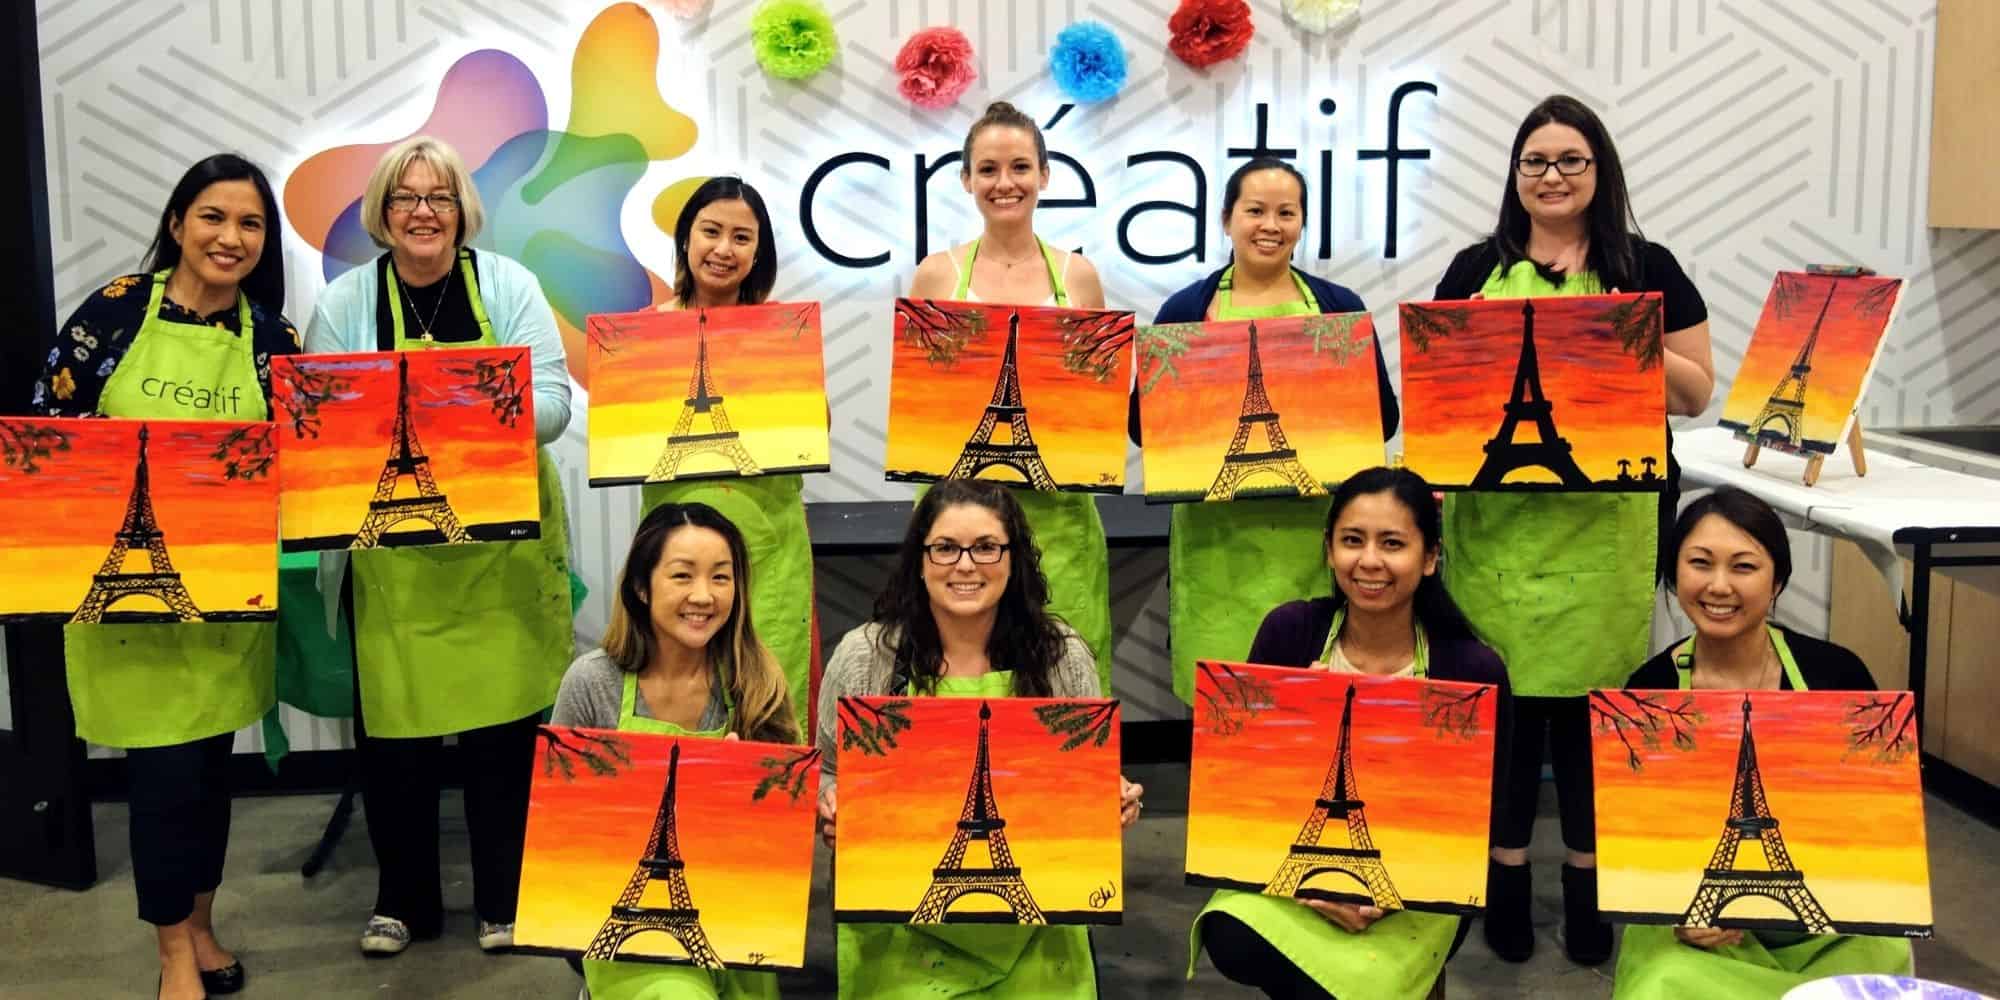 Team-Building Painting Classes Offer a Canvas for Creative